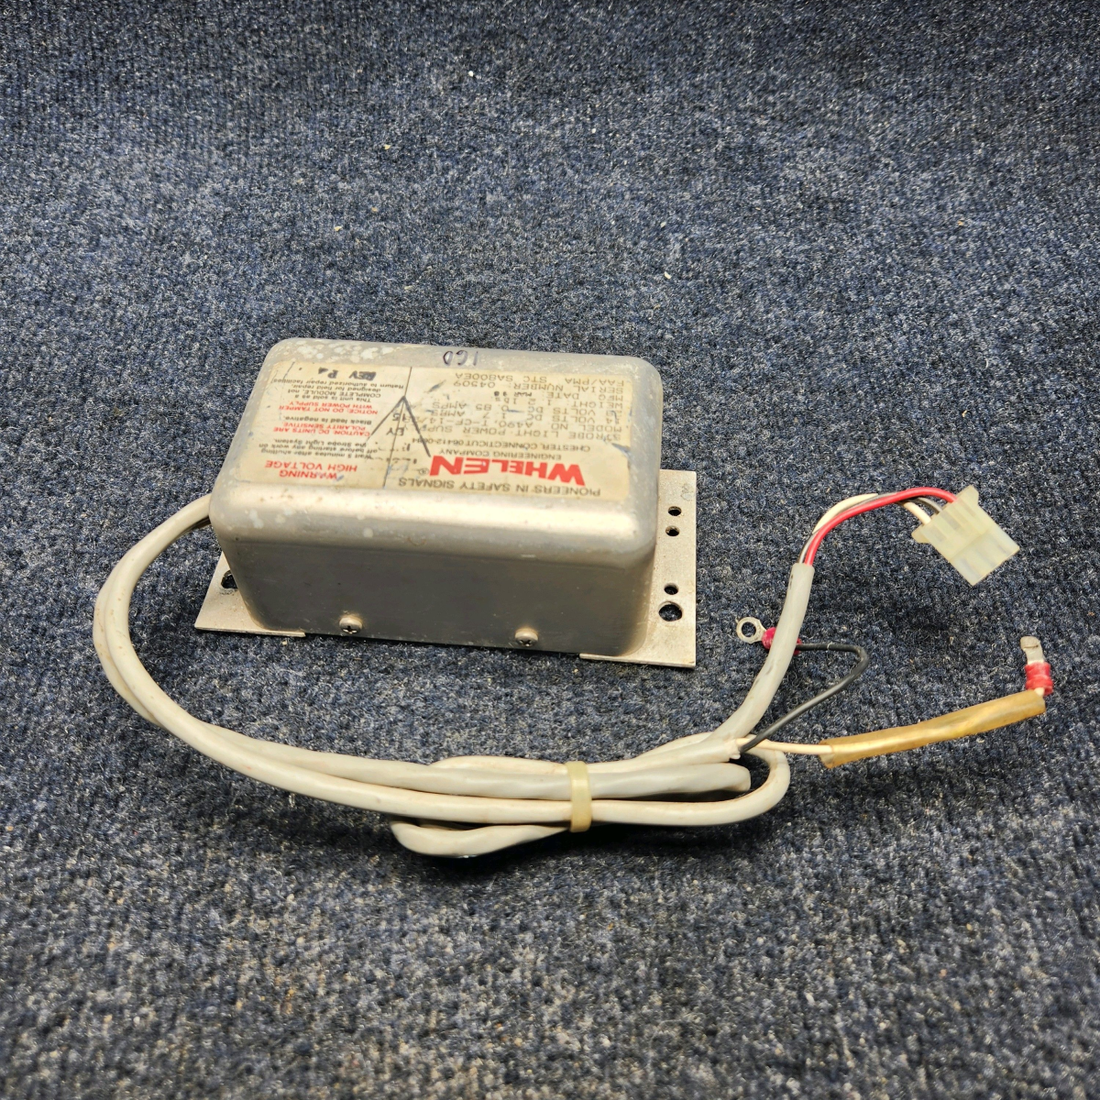 Used aircraft parts for sale, A490, T1-28 Whelen Strobe Power Supply WHELEN STROBE LIGHT POWER SUPPLY 28 VOLTS